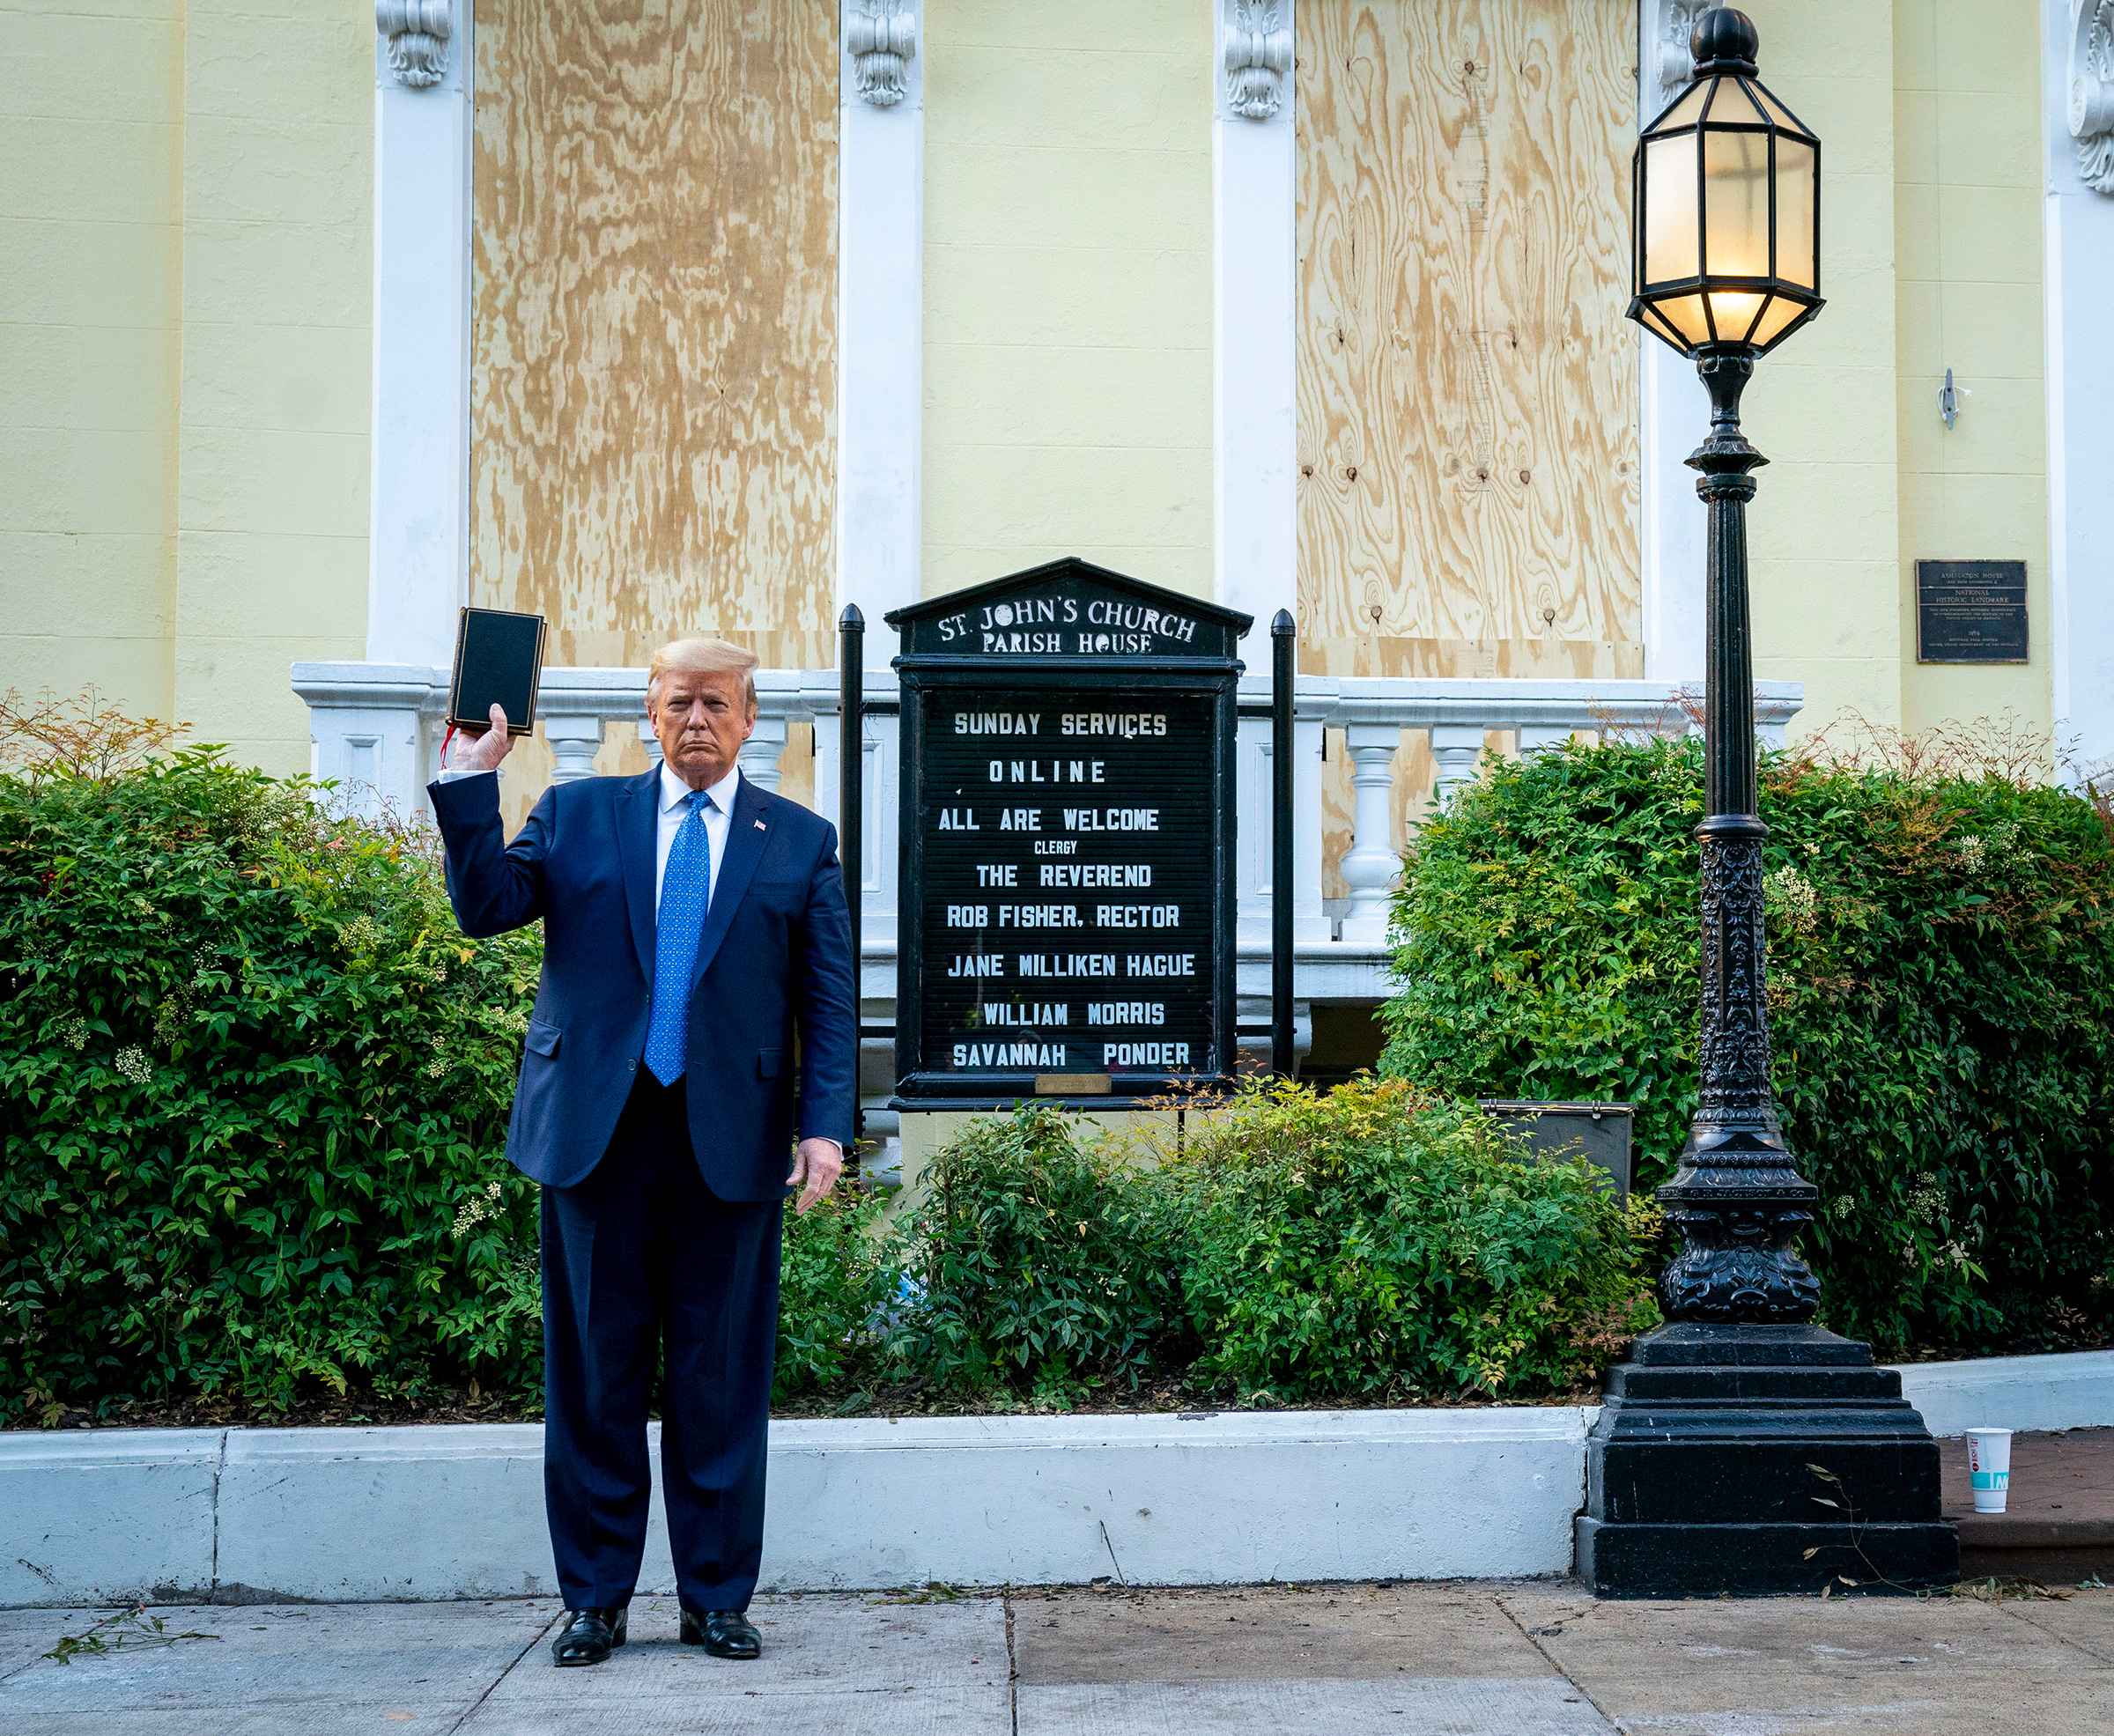 President Trump holds a Bible in front of St. John's Church in Washington, D.C., on June 1, 2020.